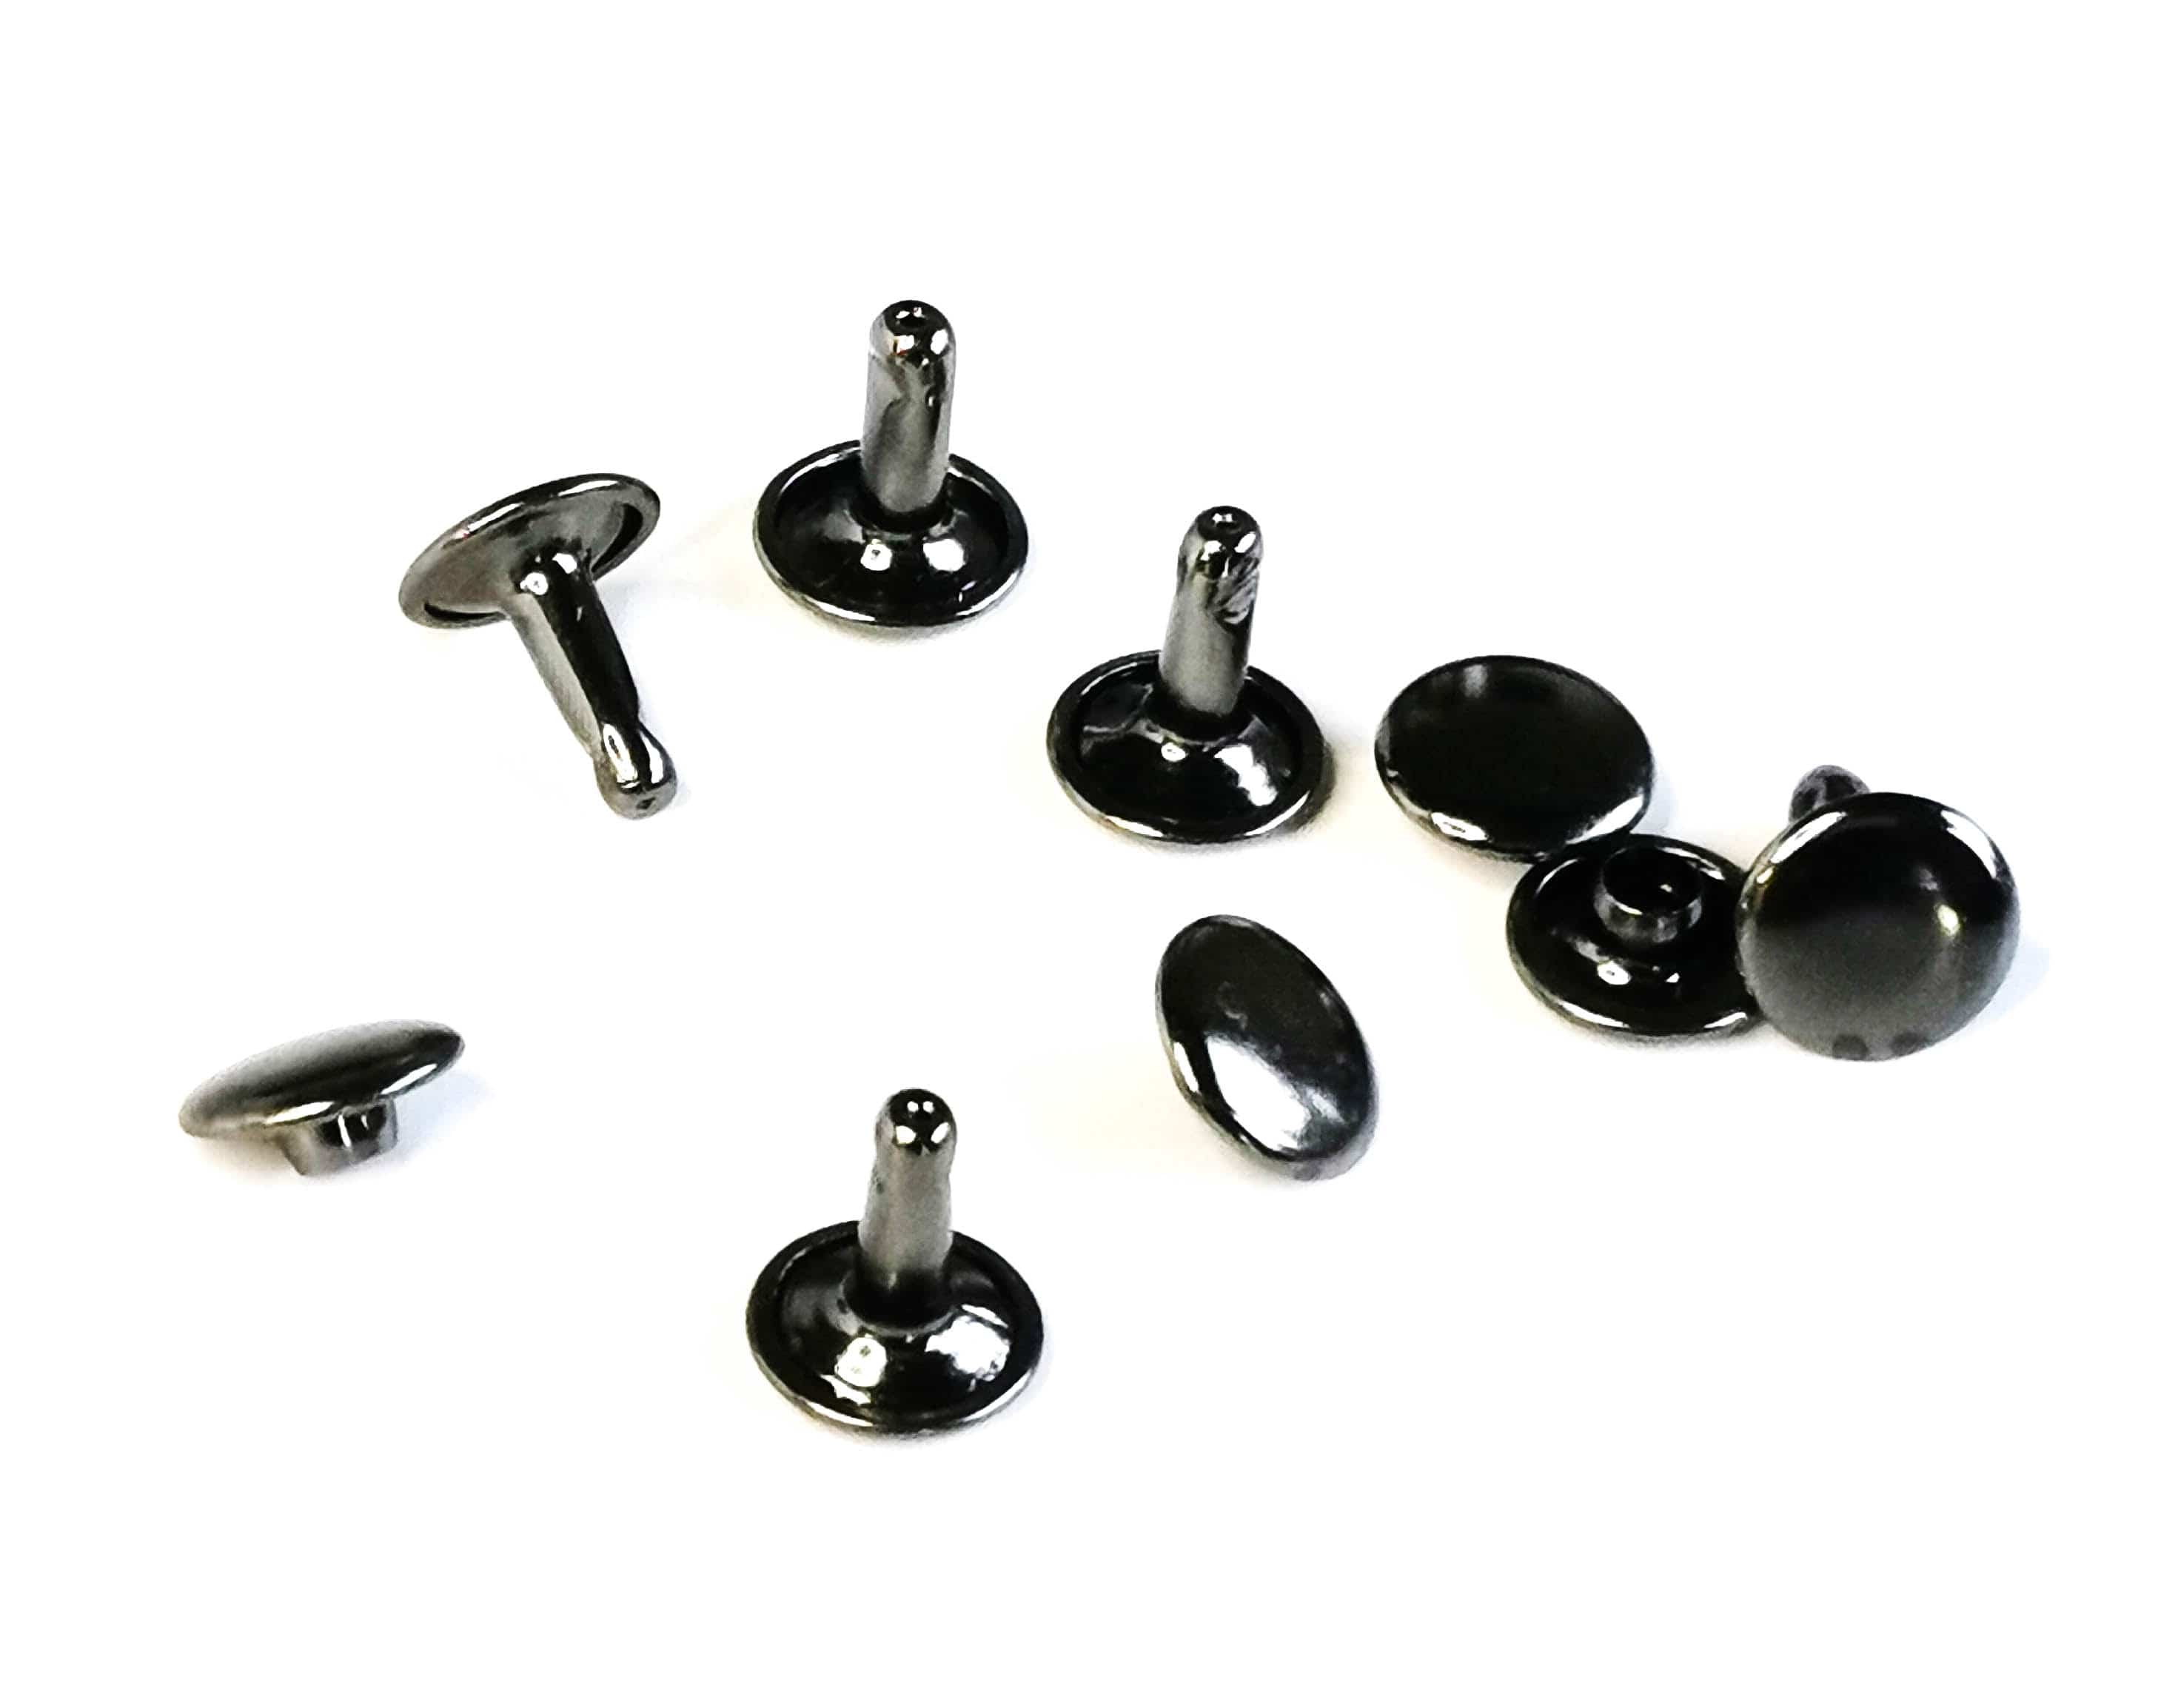 Double Capped Rivets for bags Small or Medium By Kiwi Bagineers - Kiwi Bagineers